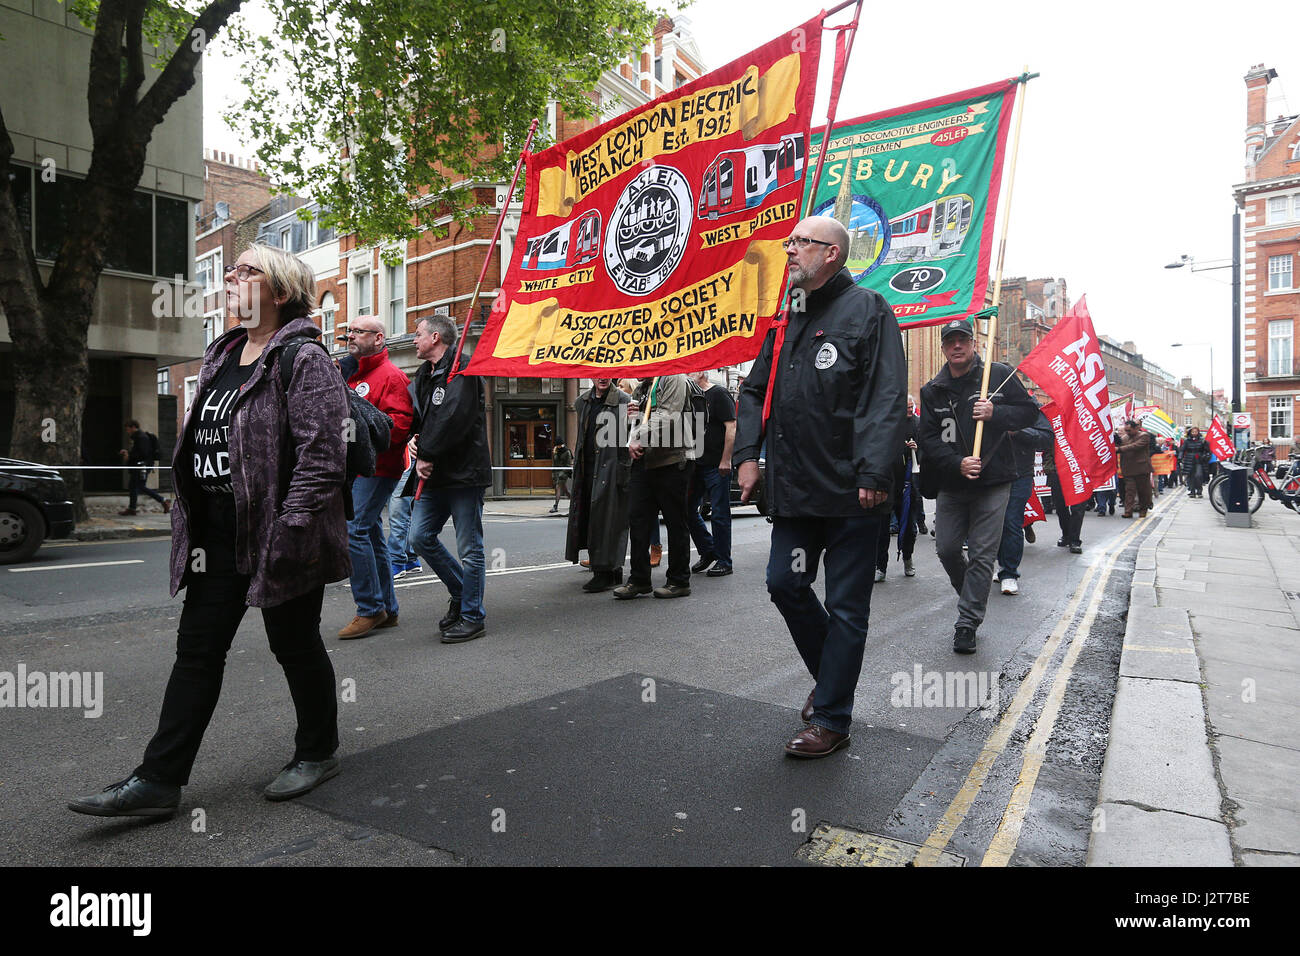 People take part in a May Day march on Theobalds Road in London. Stock Photo